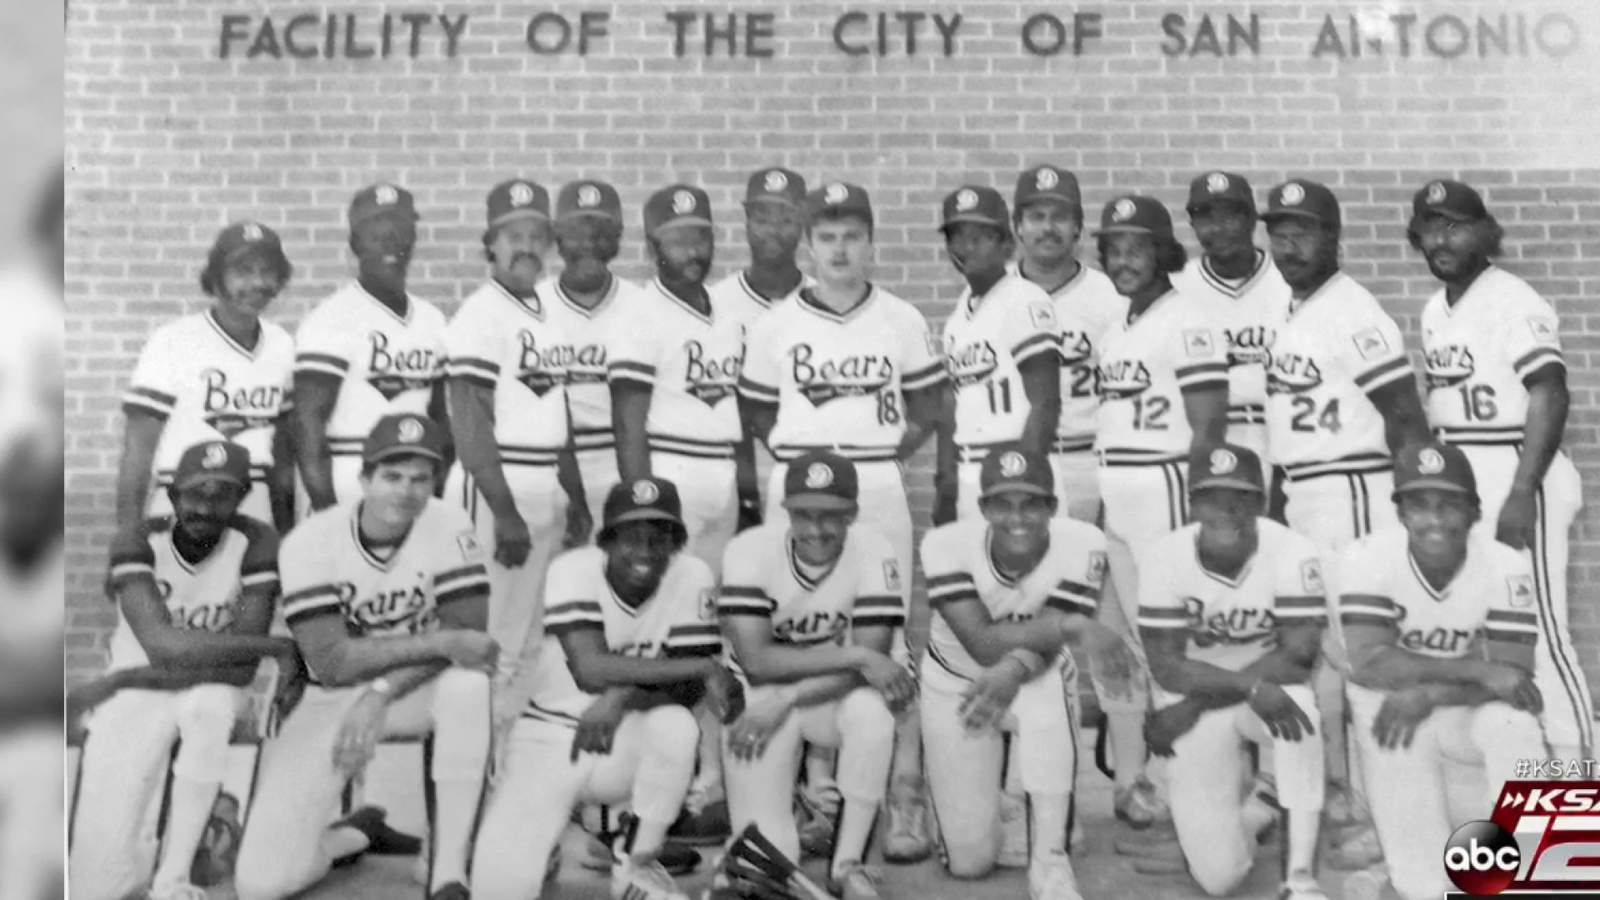 Legacy for many Black baseball players in San Antonio in 1950s and 1960s began at Pittman-Sullivan Park